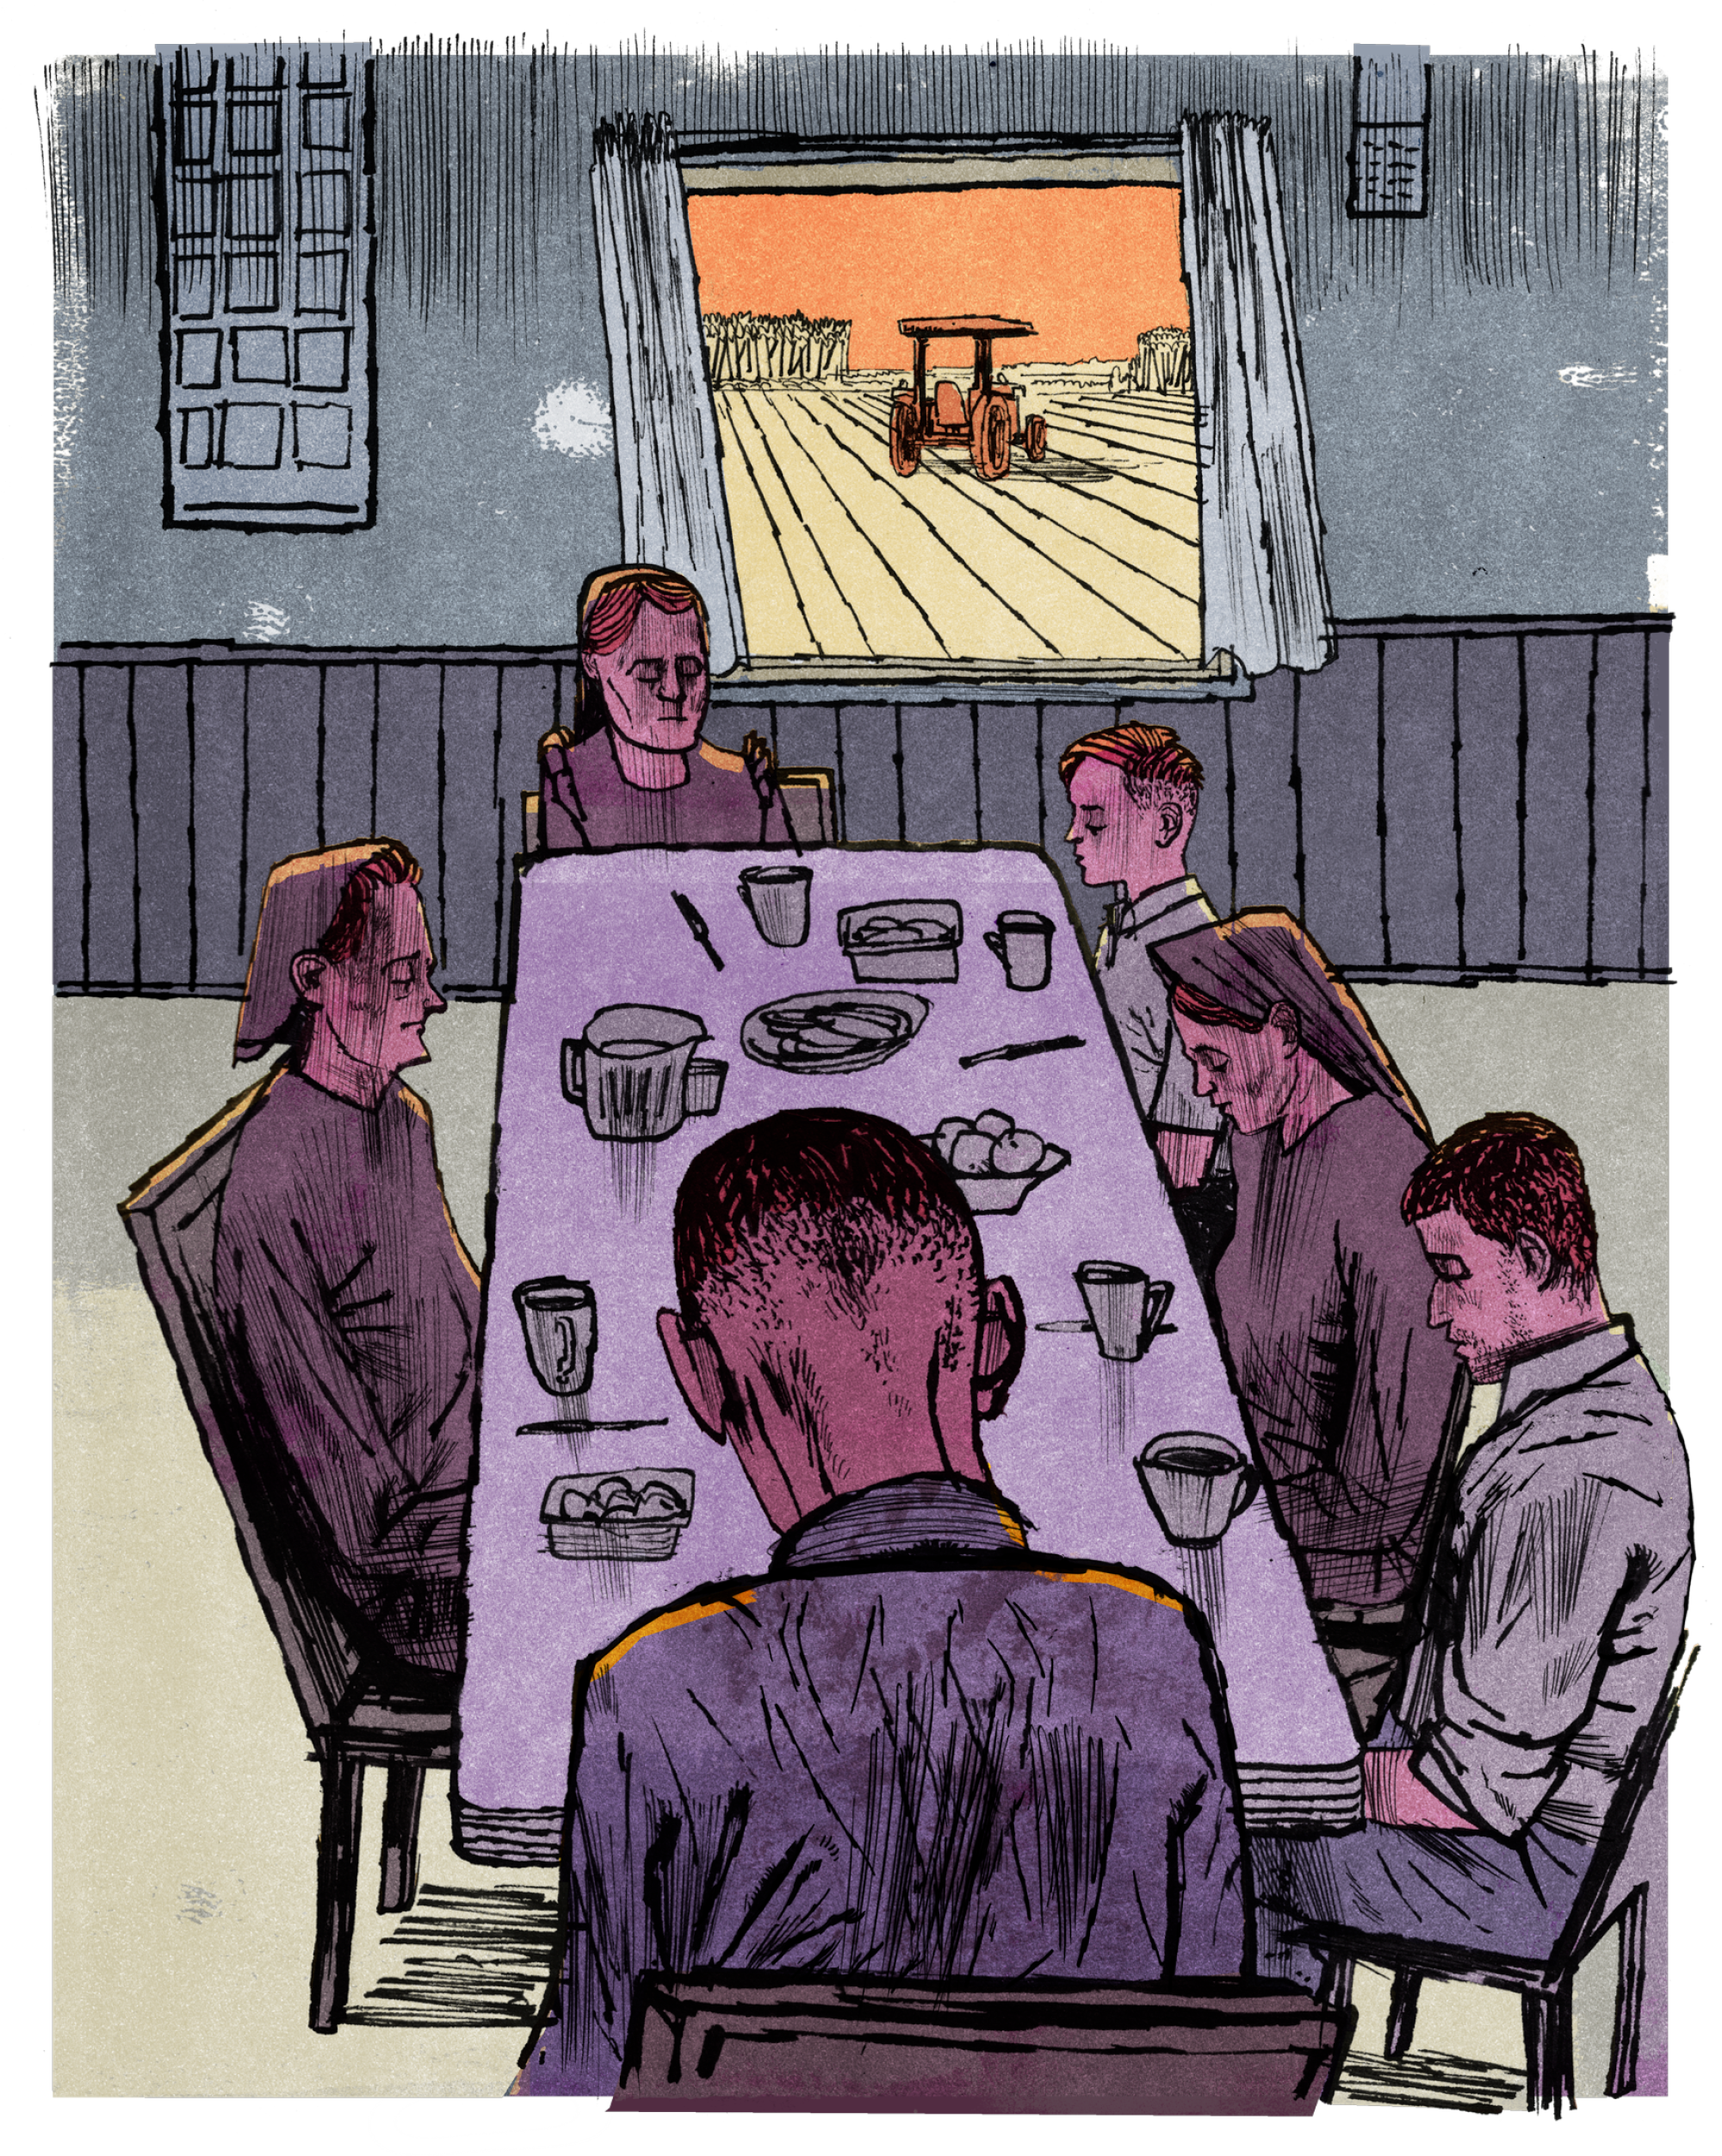 An illustration of members of the Mennonite community praying around a dinner table.